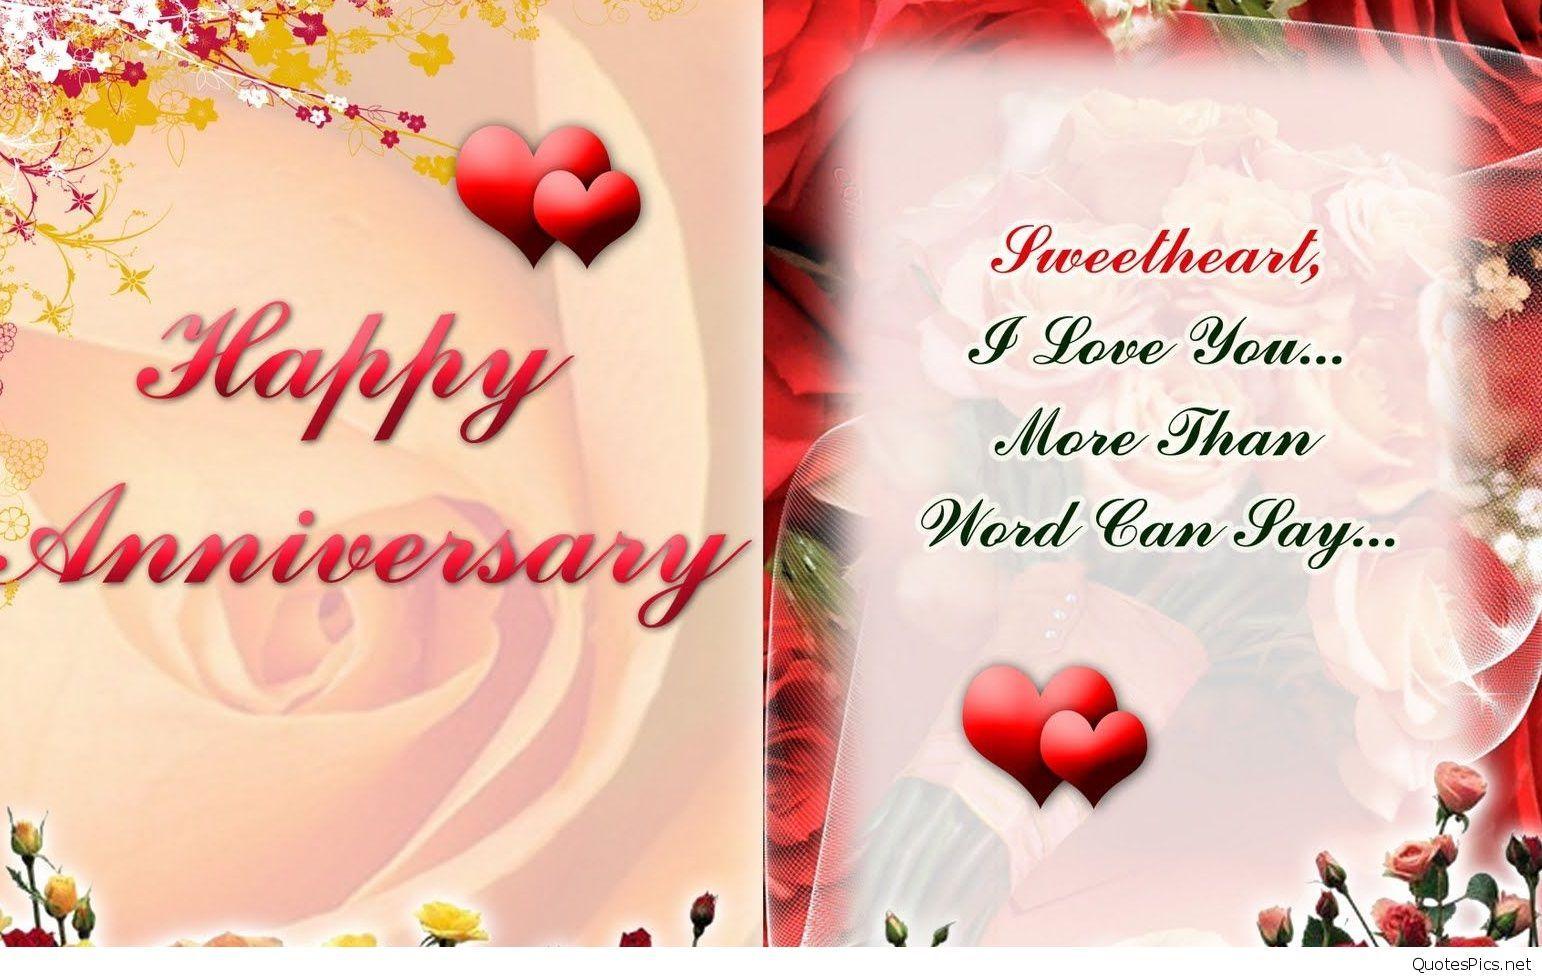 Happy anniversary love friends quotes, image & wallpaper HD